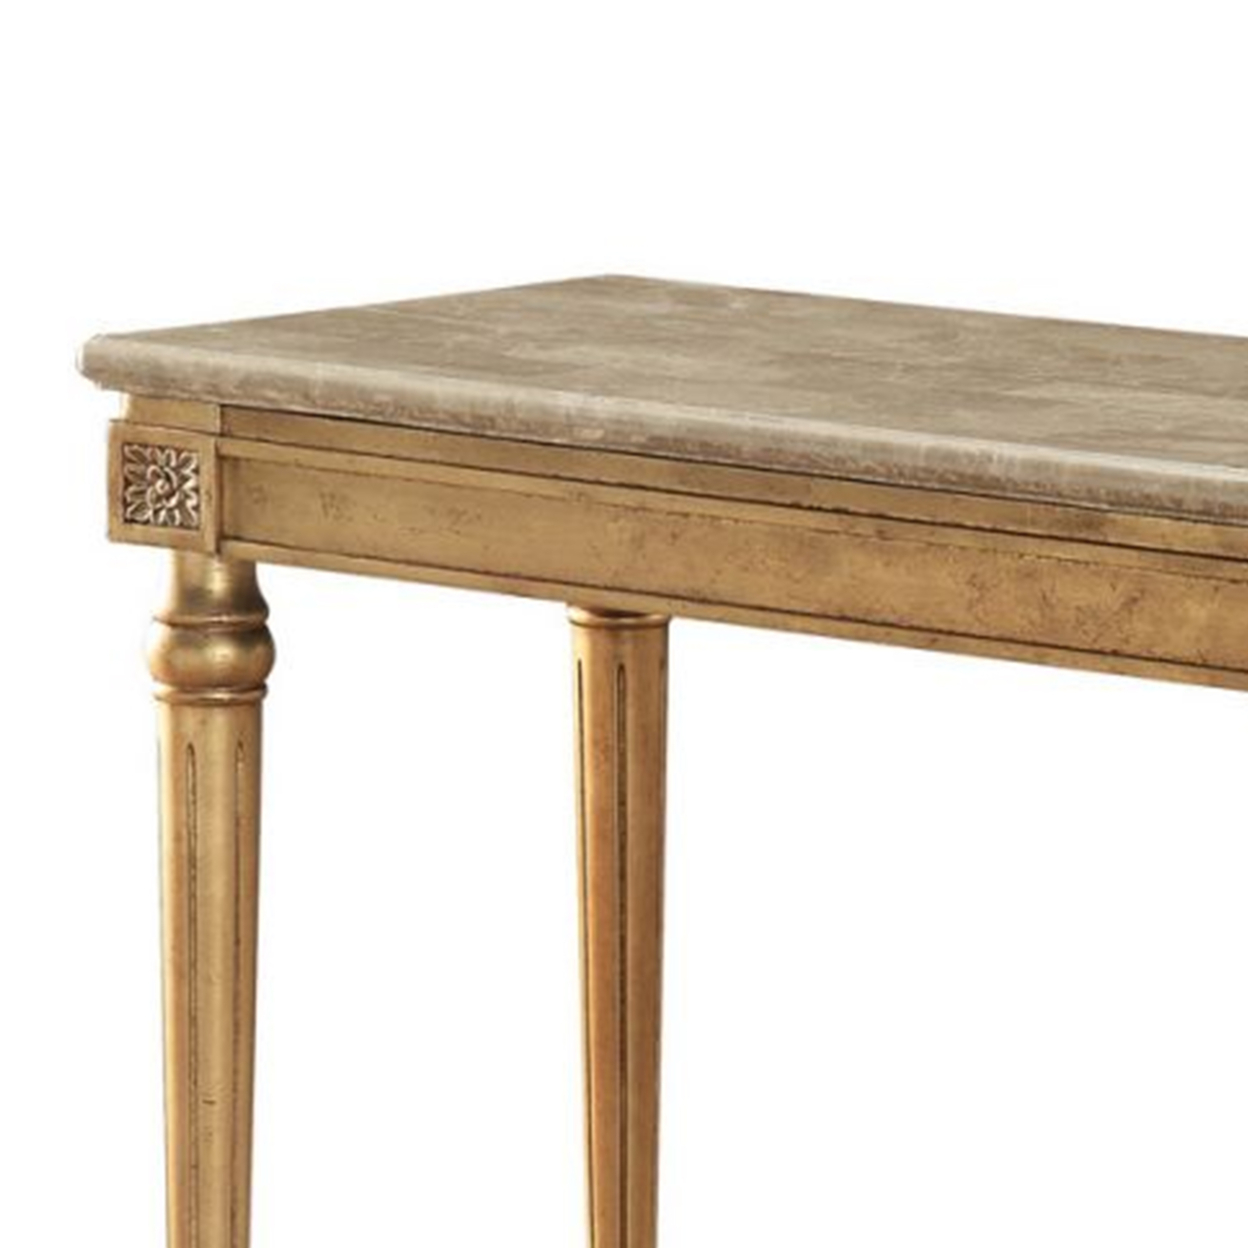 Marble Top Sofa Table With Fluted Detail Wooden Turned Legs, Gold- Saltoro Sherpi